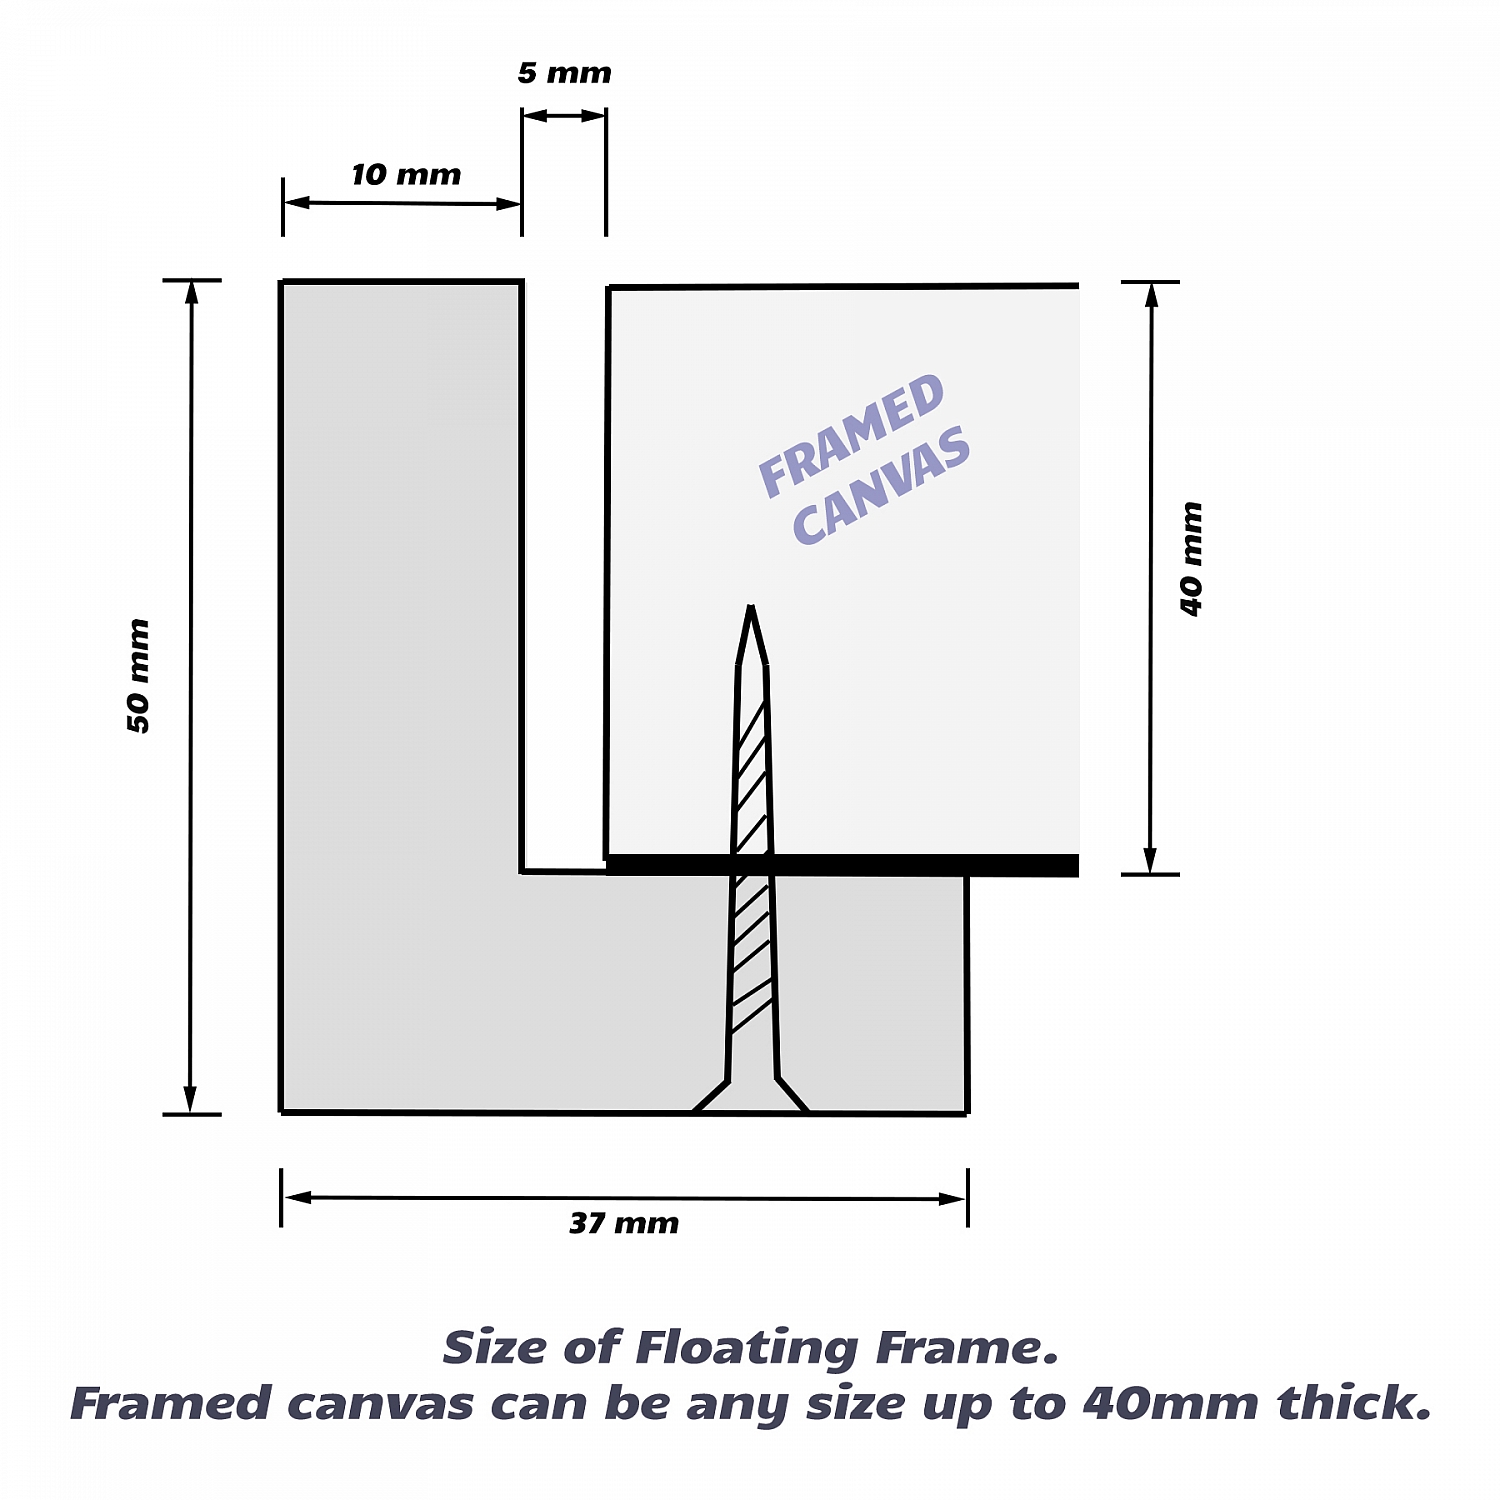 Prime - Float White Moulding Frame (Shadow Box Frame), DIY Canvas kit | Drawing_for_floating_frame_with_40mm_canvas.jpg